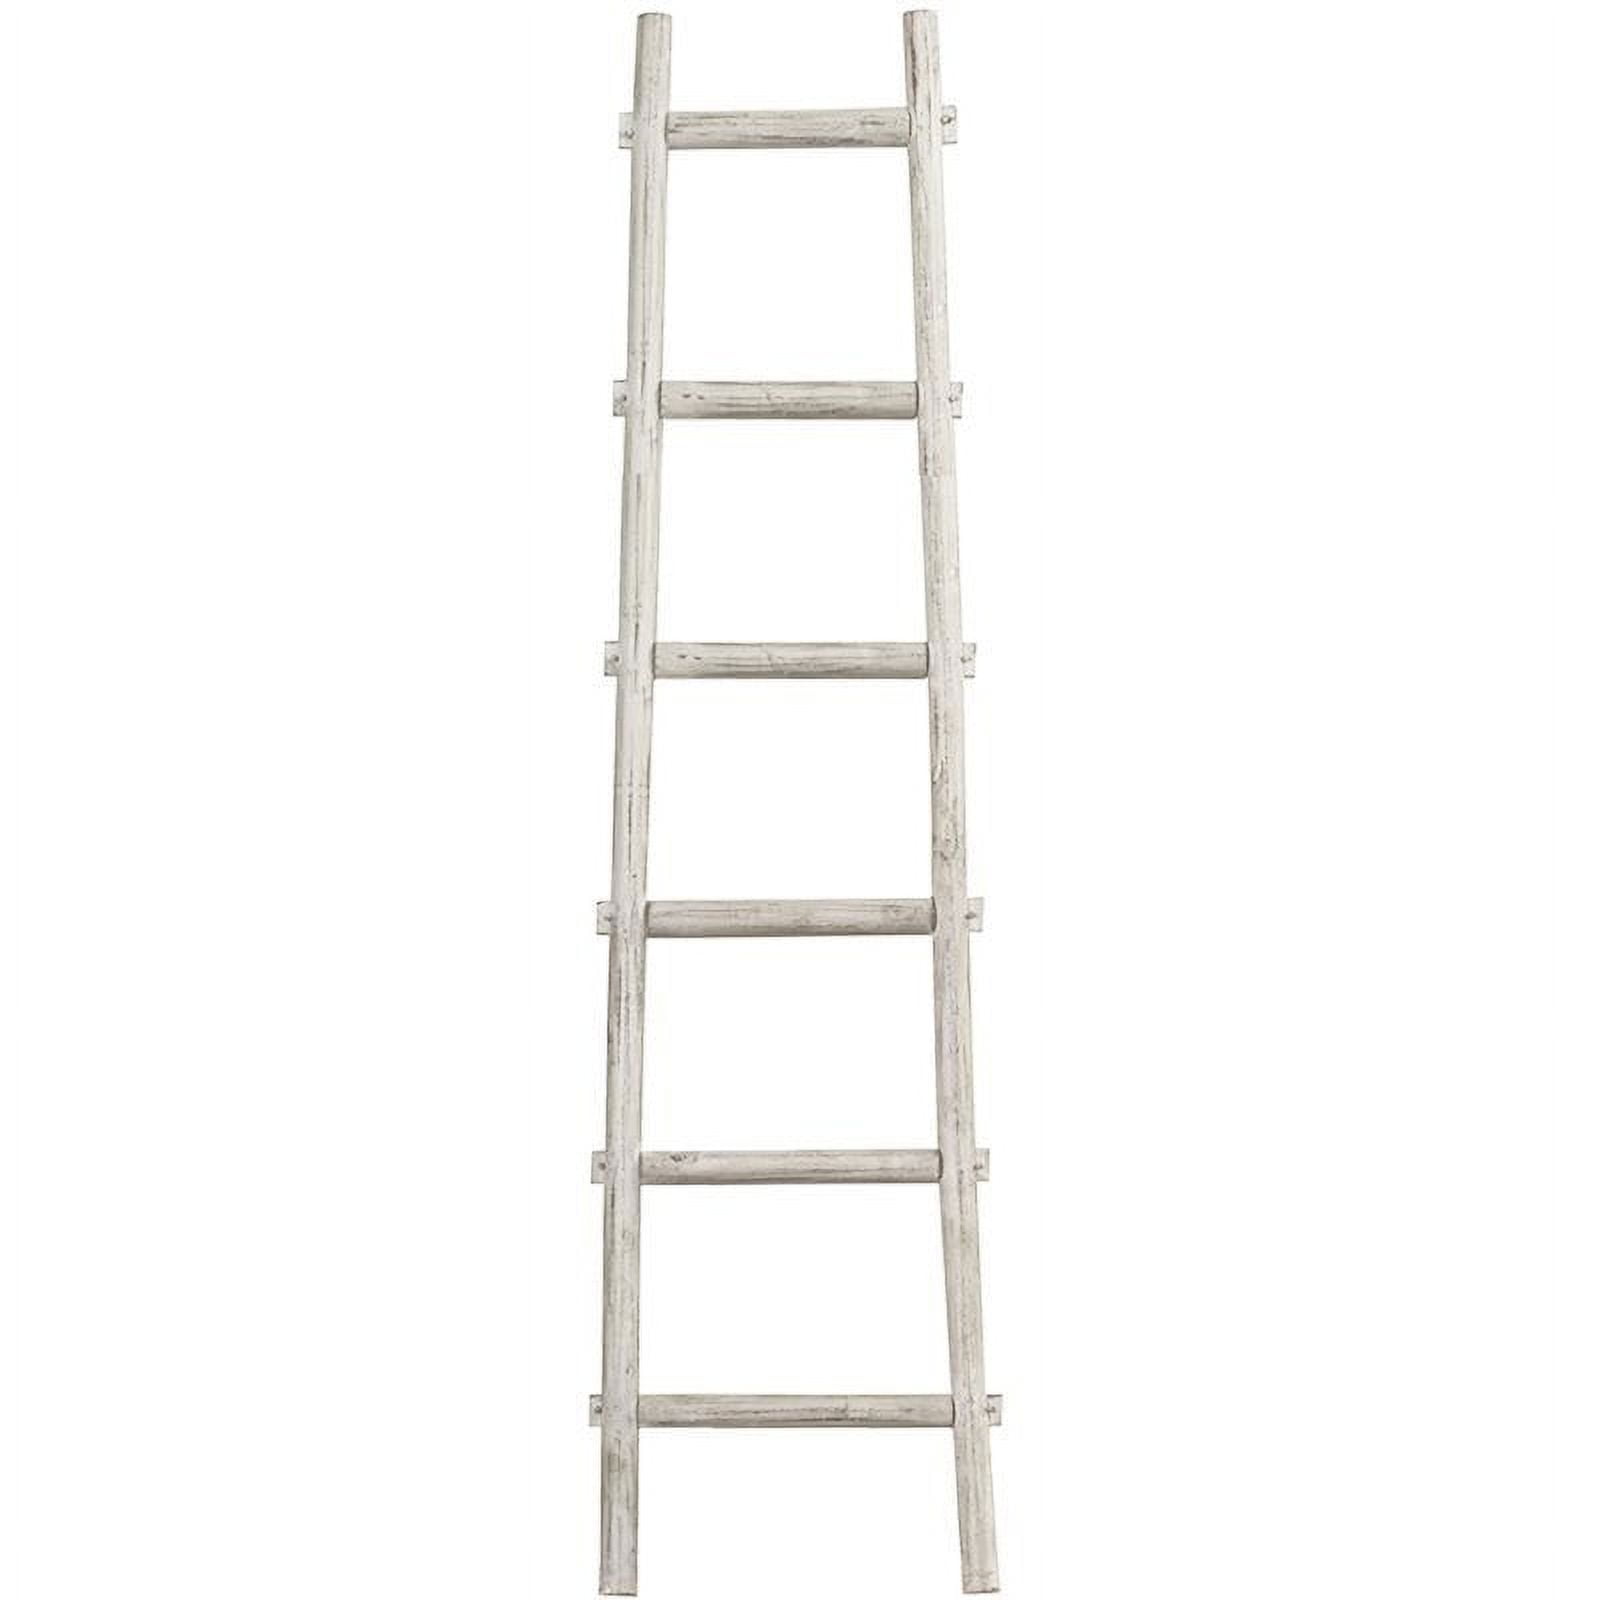 Bm210394 2 X 72 X 18 In. Transitional Style Wooden Decor Ladder With 6 Steps, White